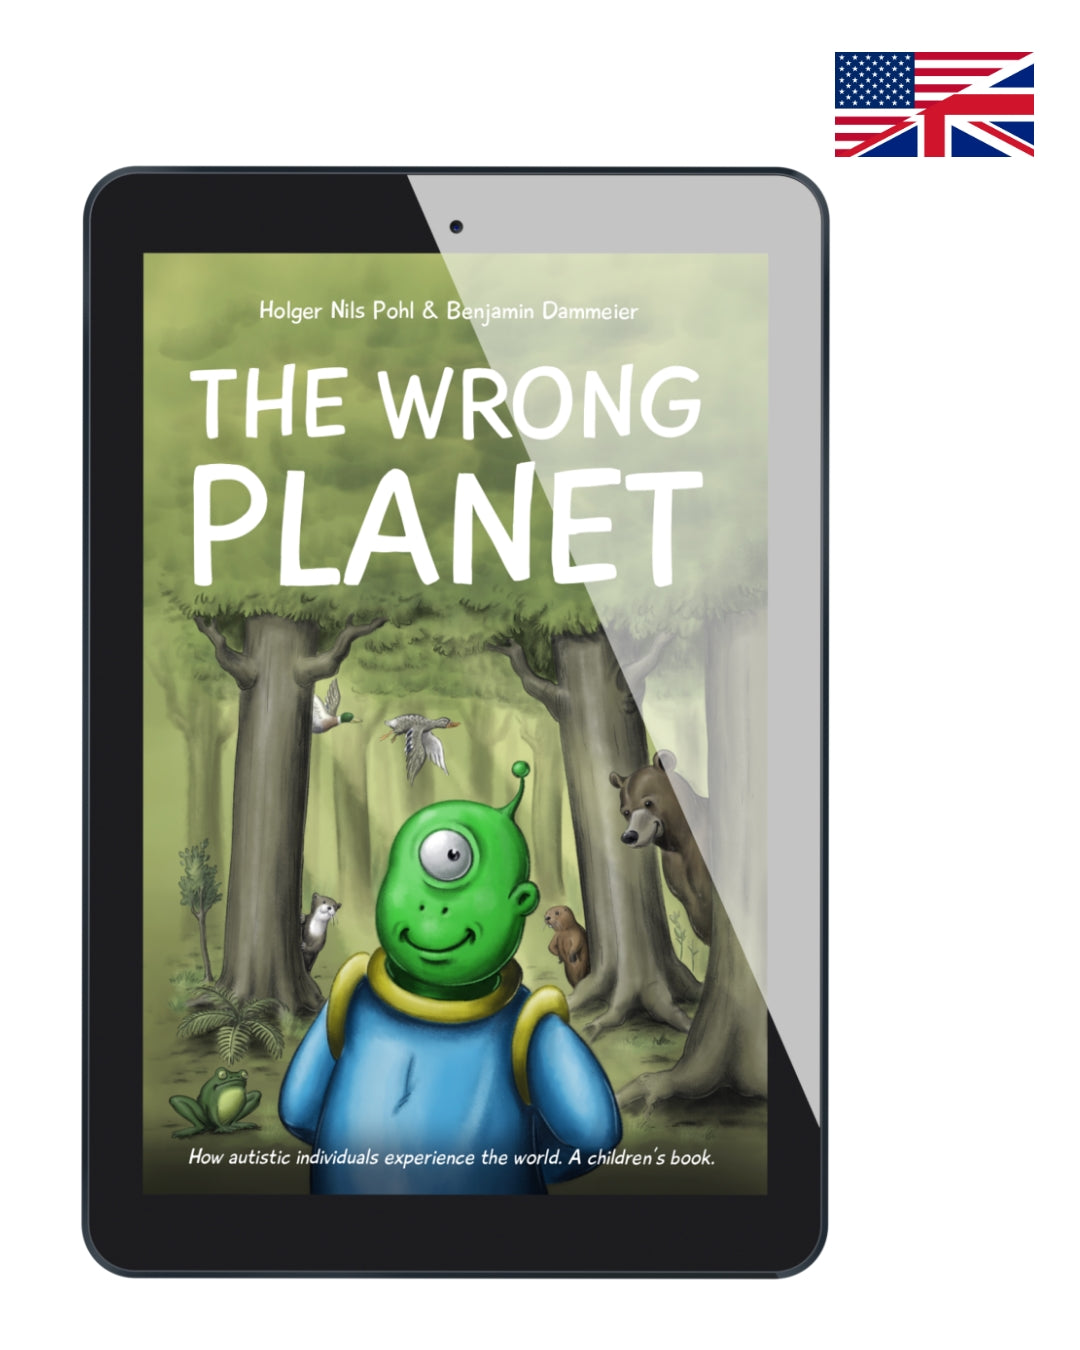 Pre-Order The Wrong Planet ebook